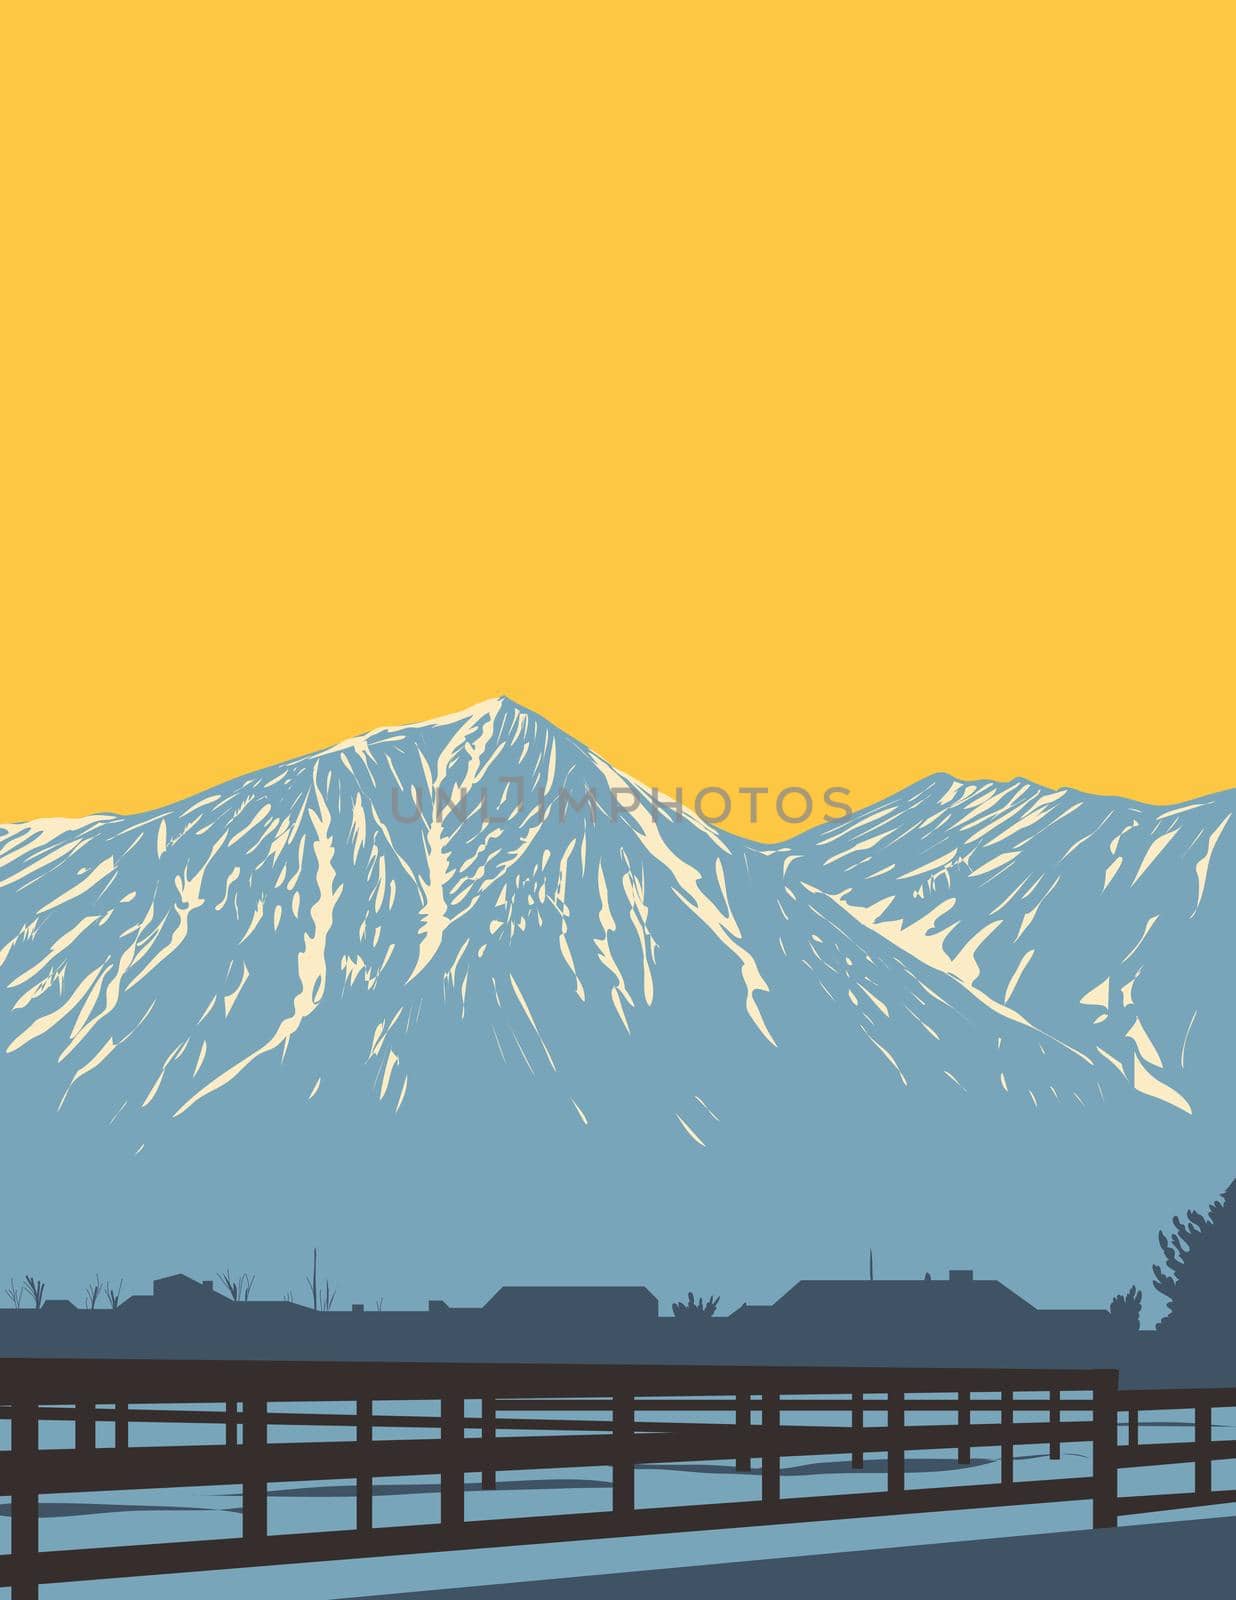 WPA poster art of Monument Peak and East Peak in South Lake Tahoe as viewed from Gardnerville in Douglas County, Nevada, United States USA done in works project administration style.